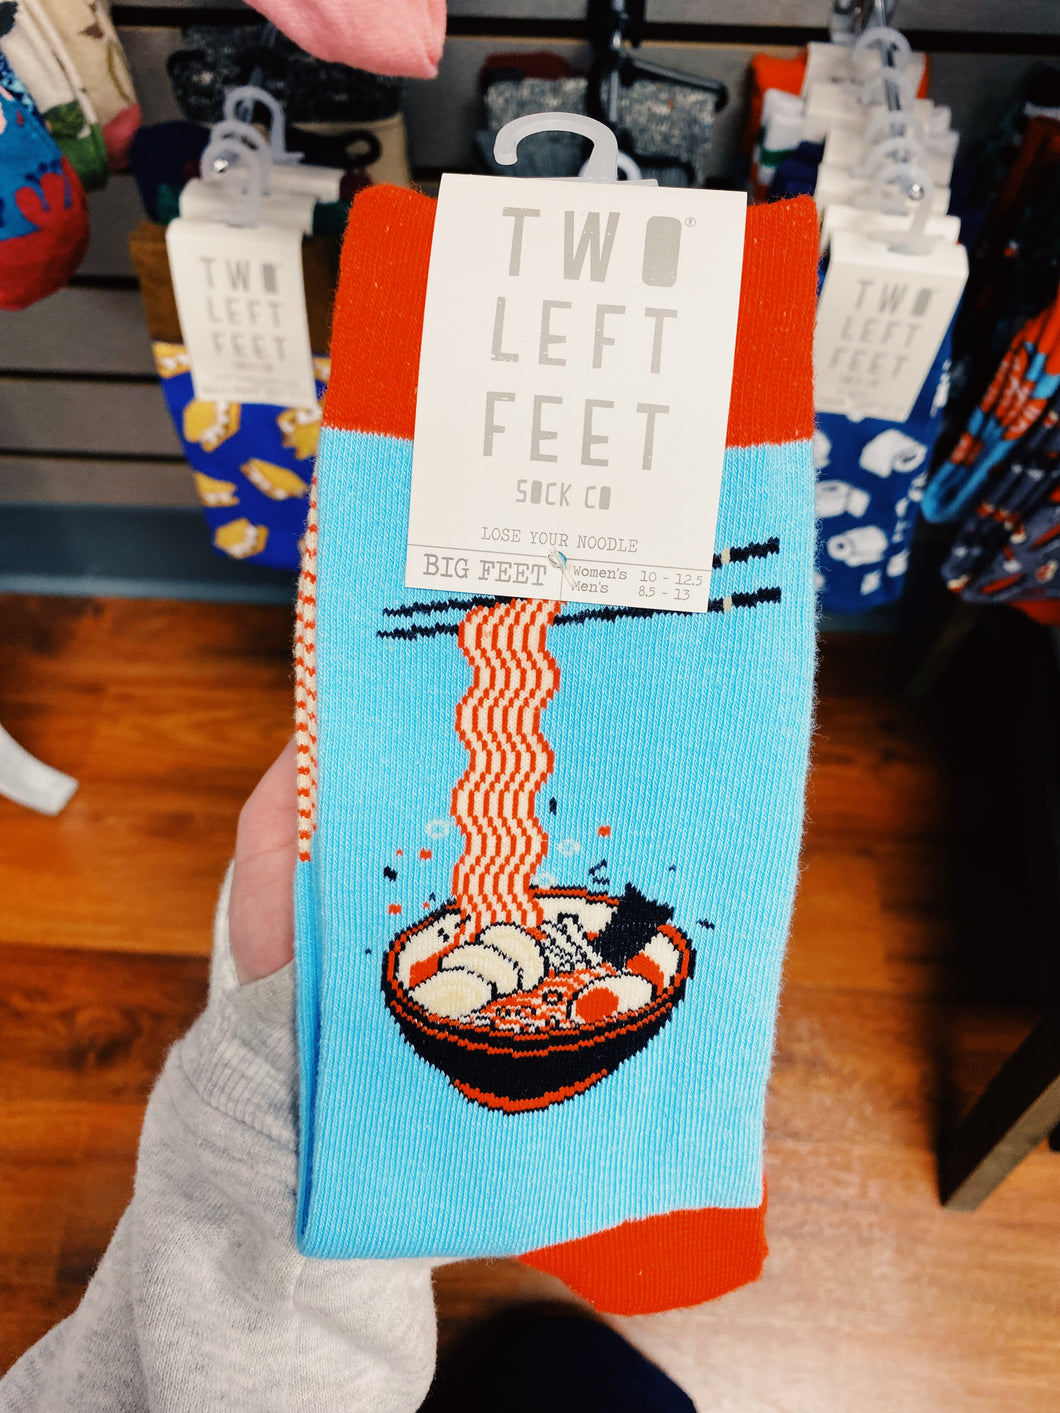 Two Left Feet— Lose Your Noodle Socks